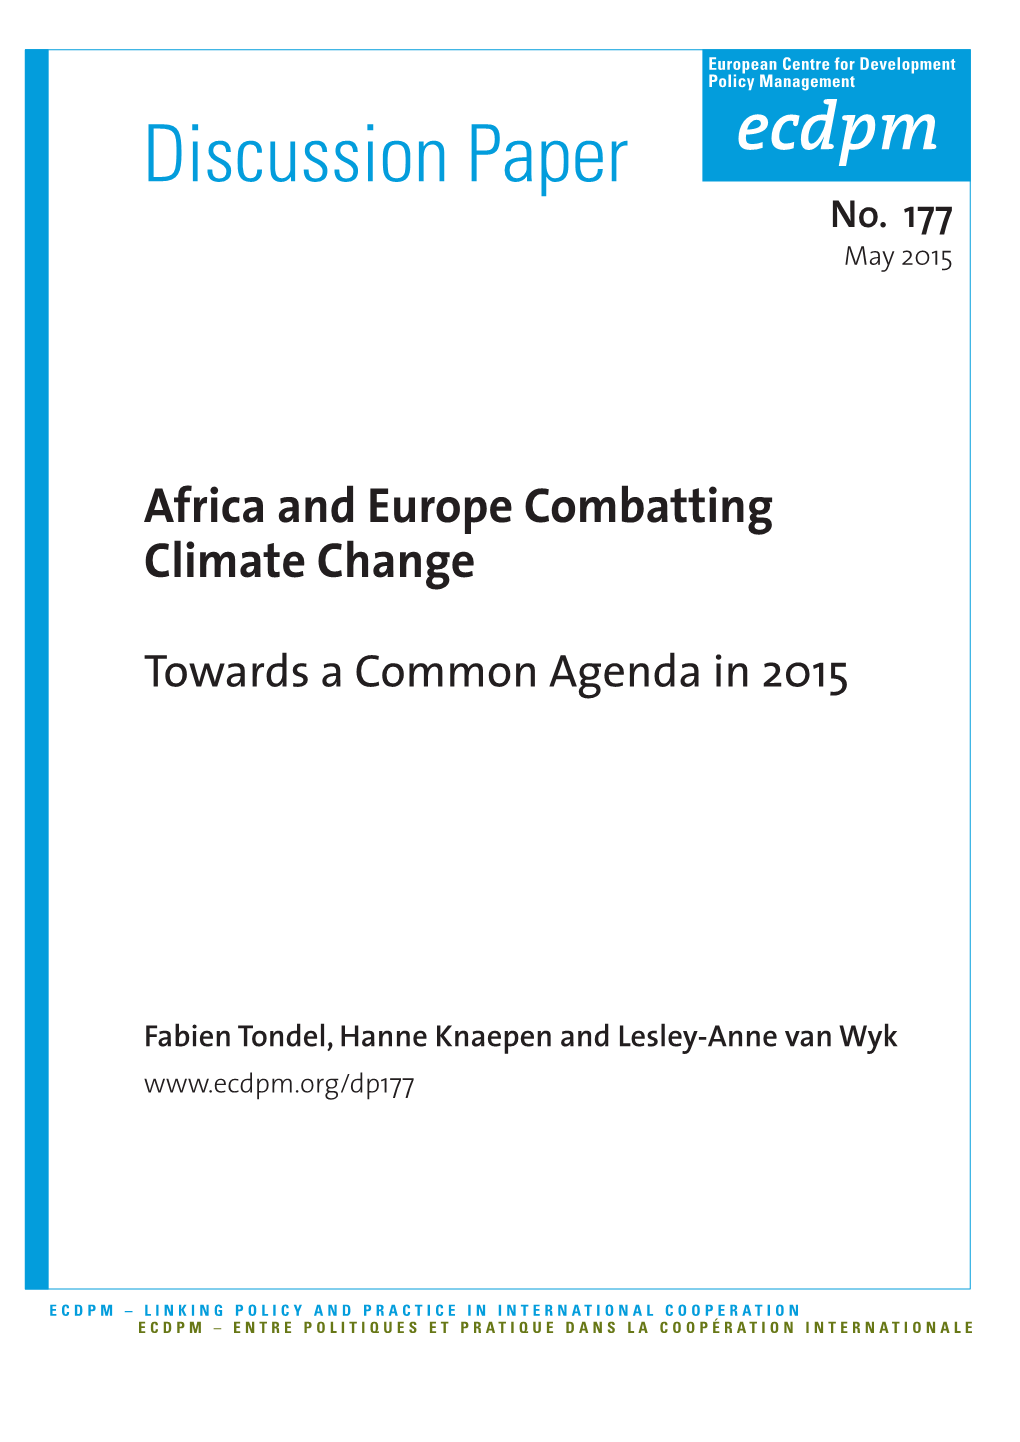 Africa and Europe Combatting Climate Change